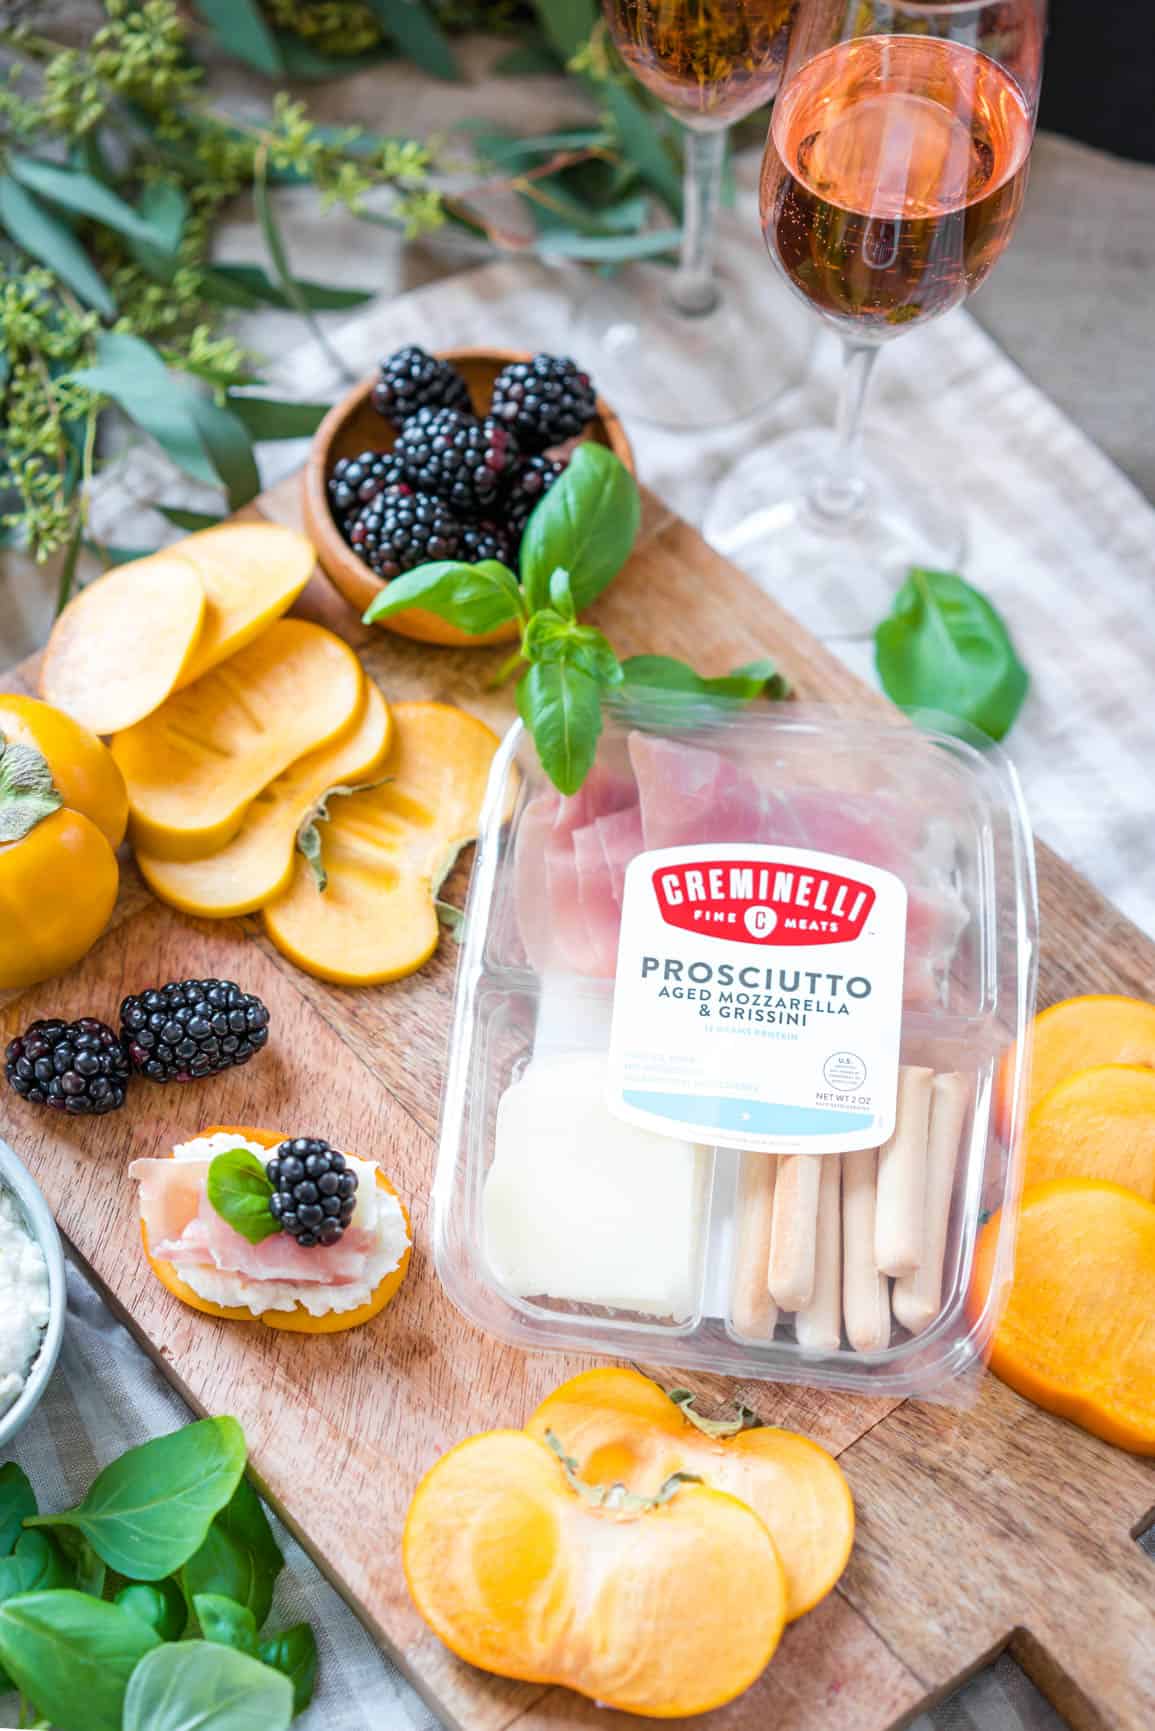 Easy Fuyu Persimmon Prosciutto Appetizers with Ricotta and Blackberries